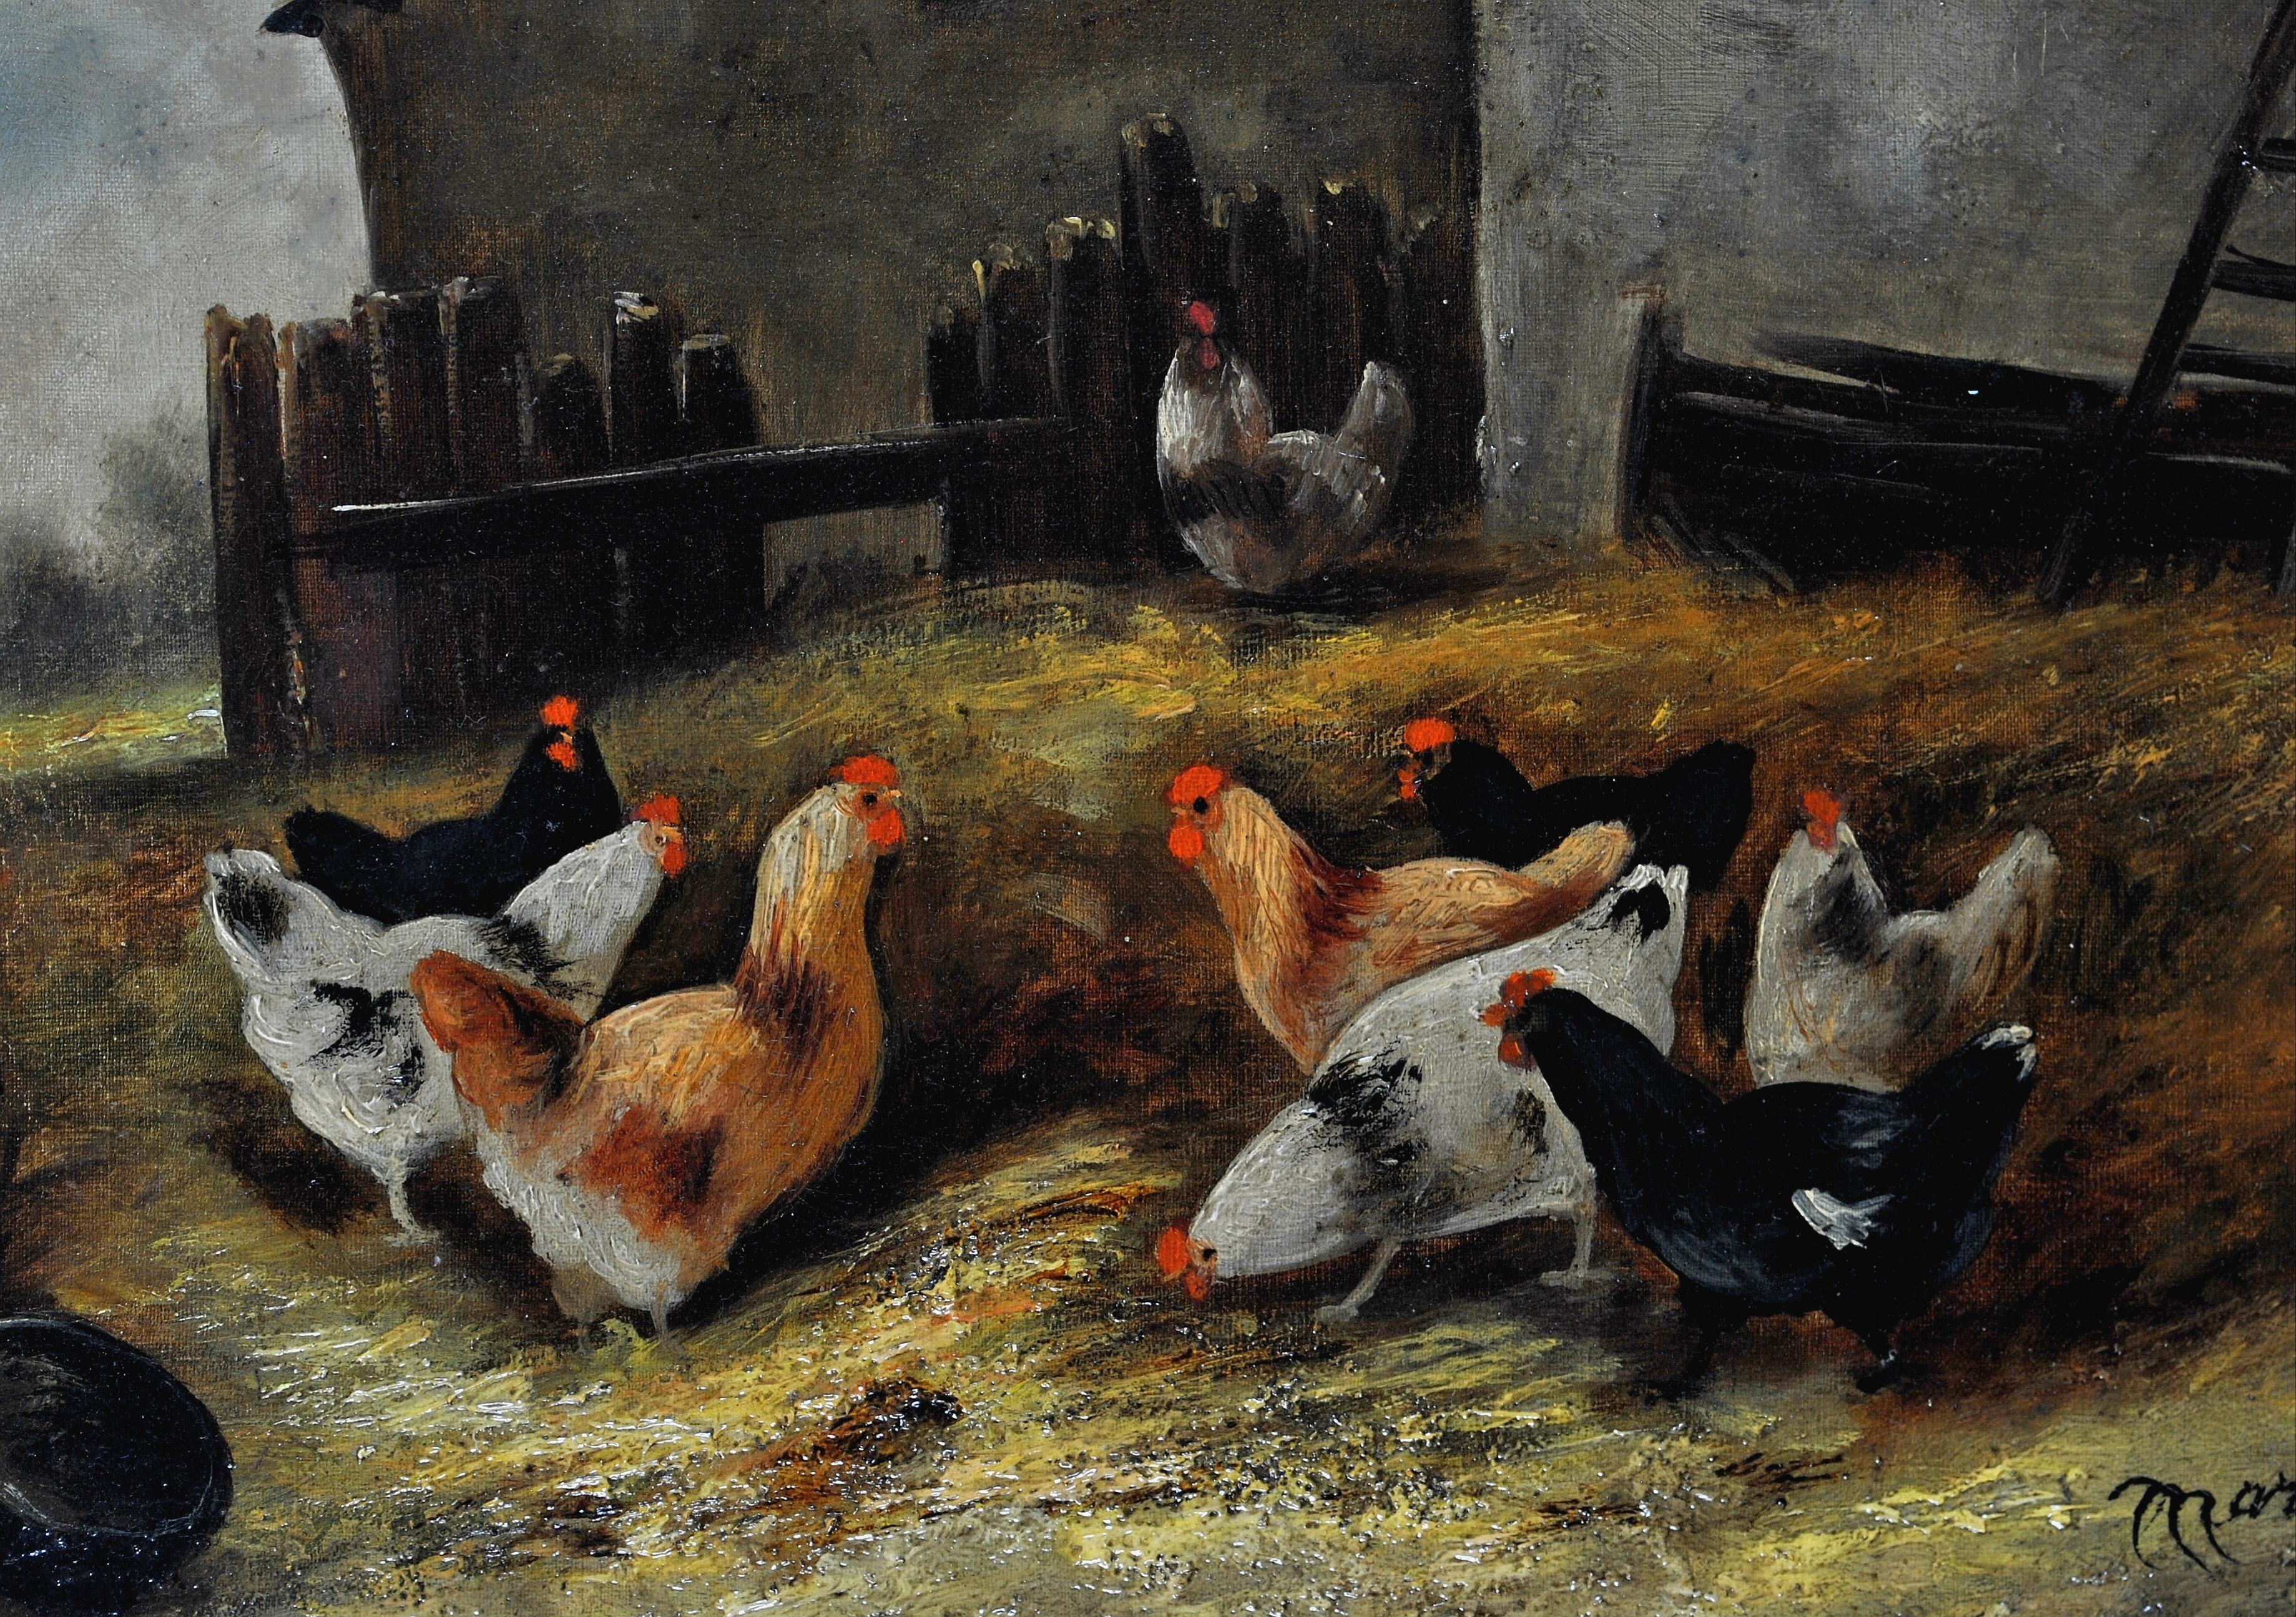 Chickens in a Farmyard - Large 19th Century French Oil on Canvas Painting - Black Animal Painting by Charles Marechal